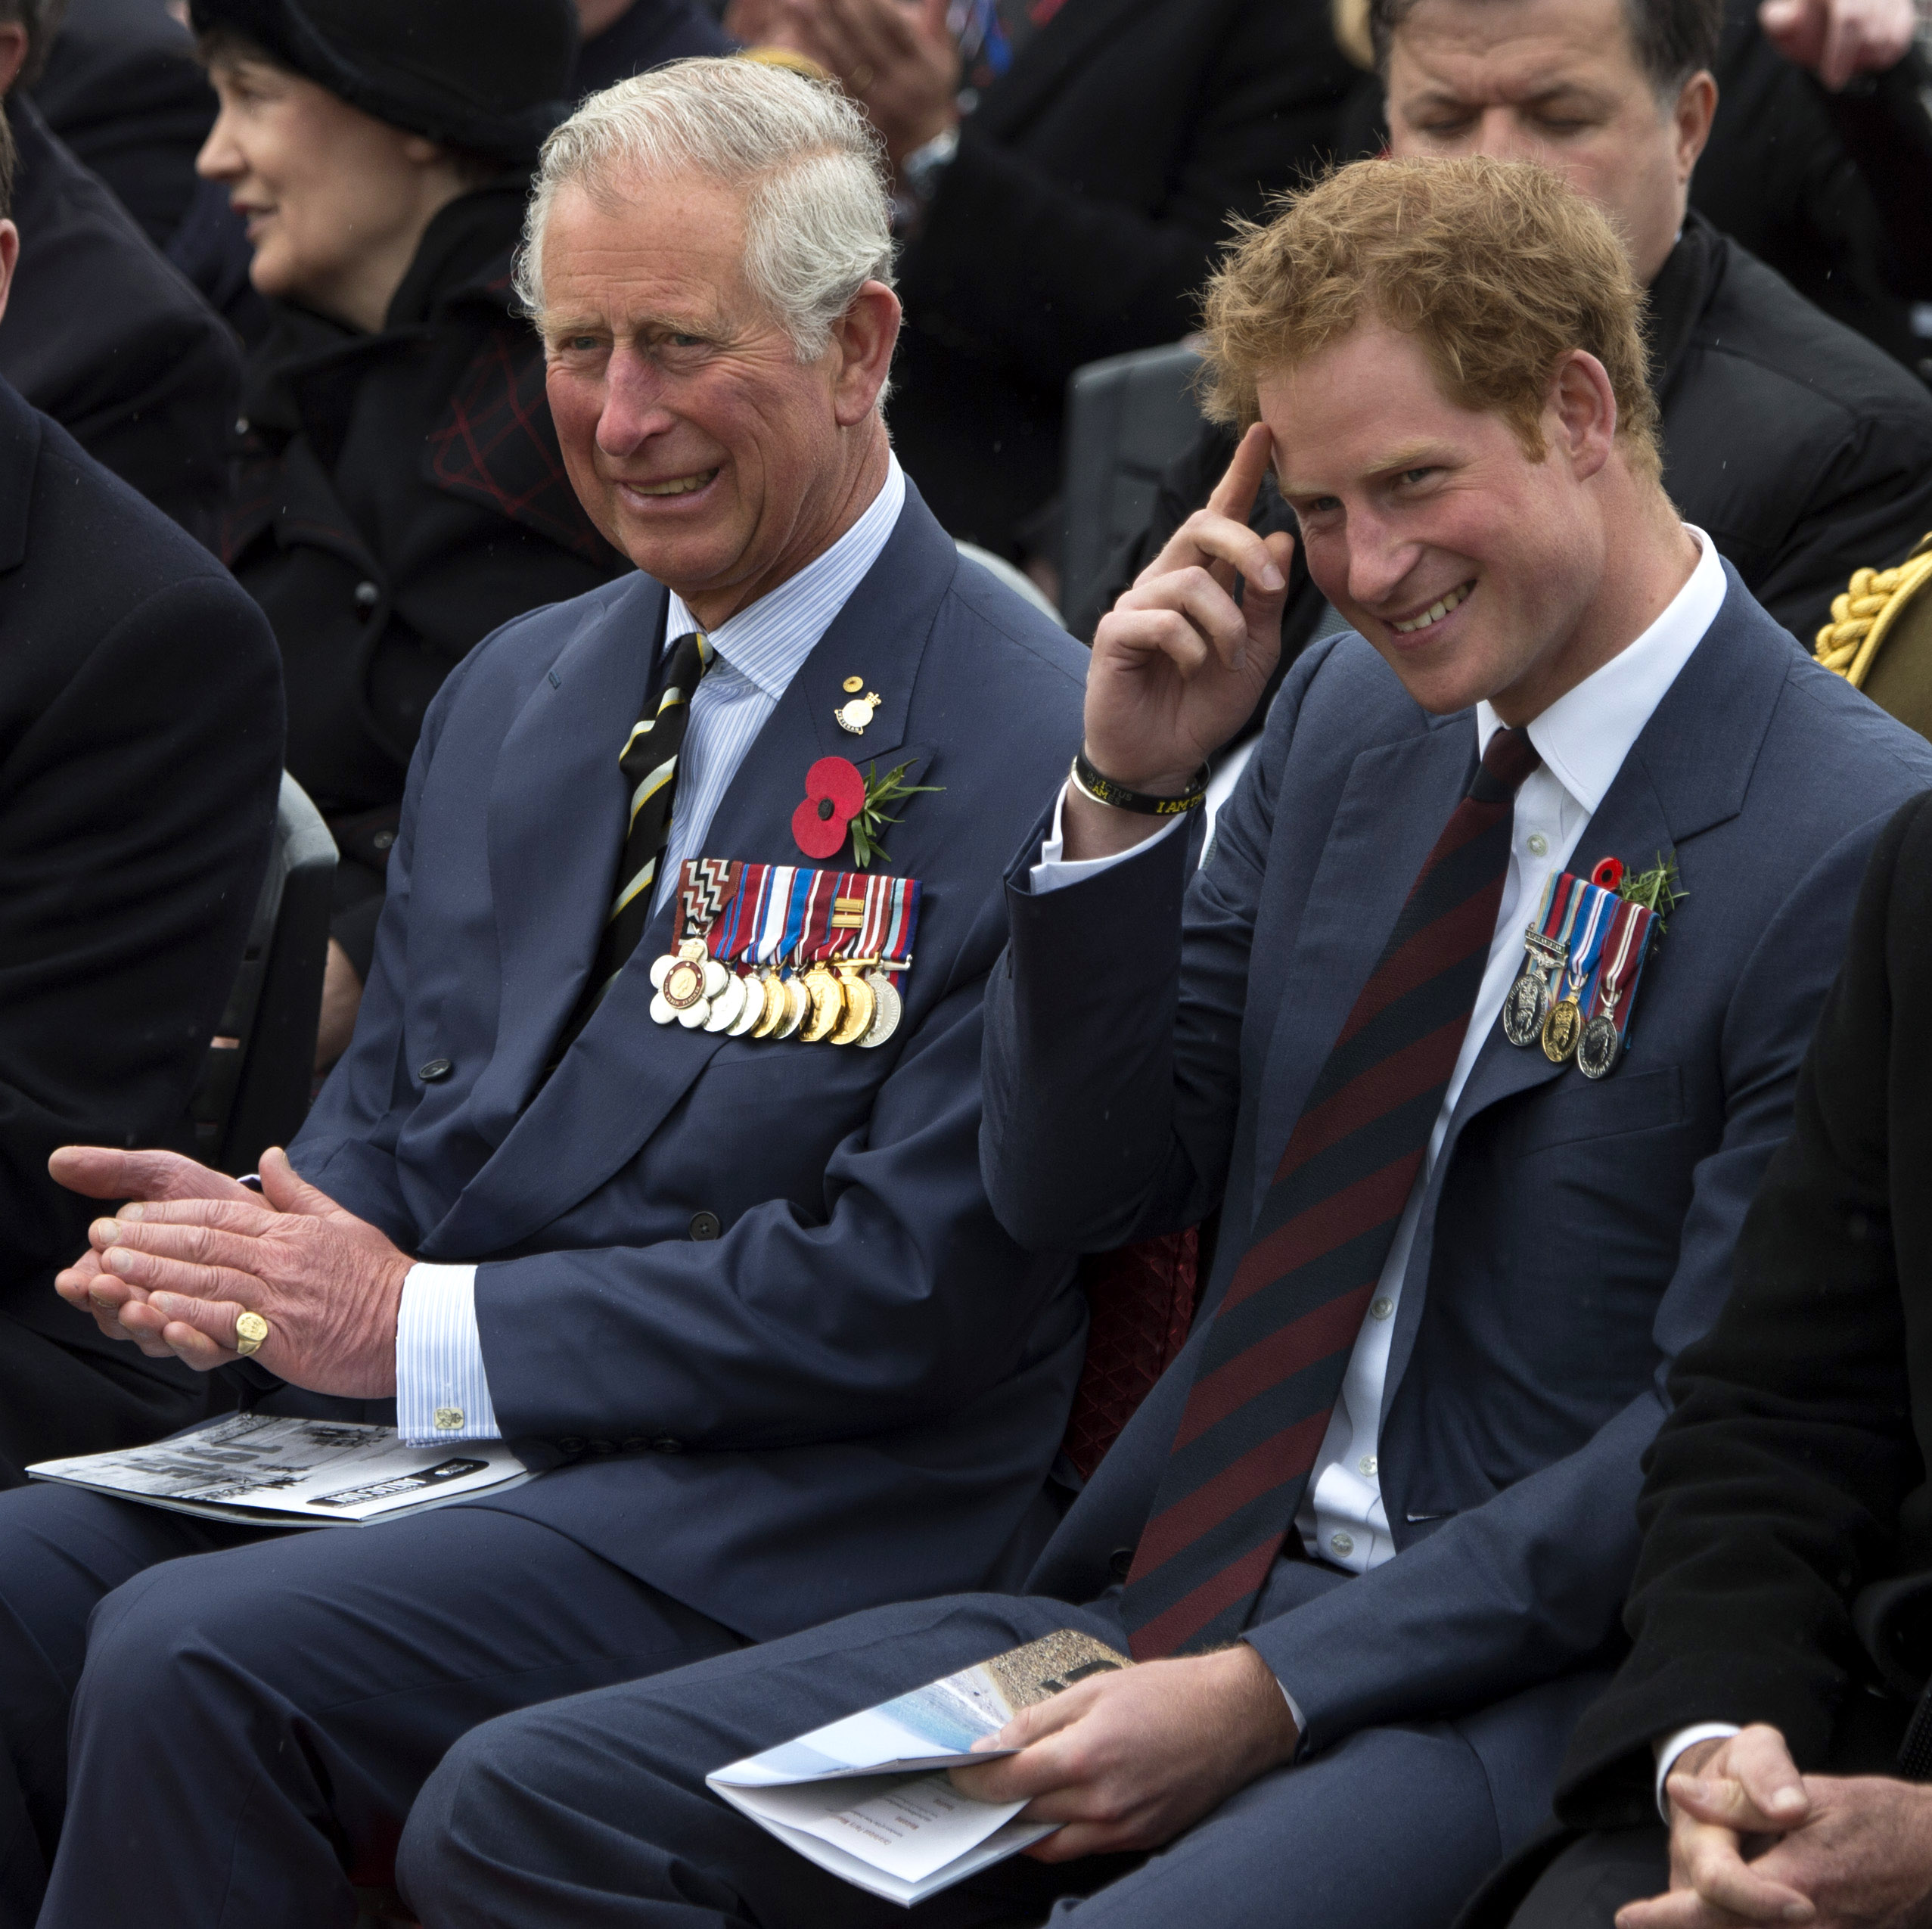 Prince Charles, Prince of Wales and Prince Harry attend the New Zealand Memorial Service in Eceabat, Turkey, on April 25, 2015. | Source: Getty Images